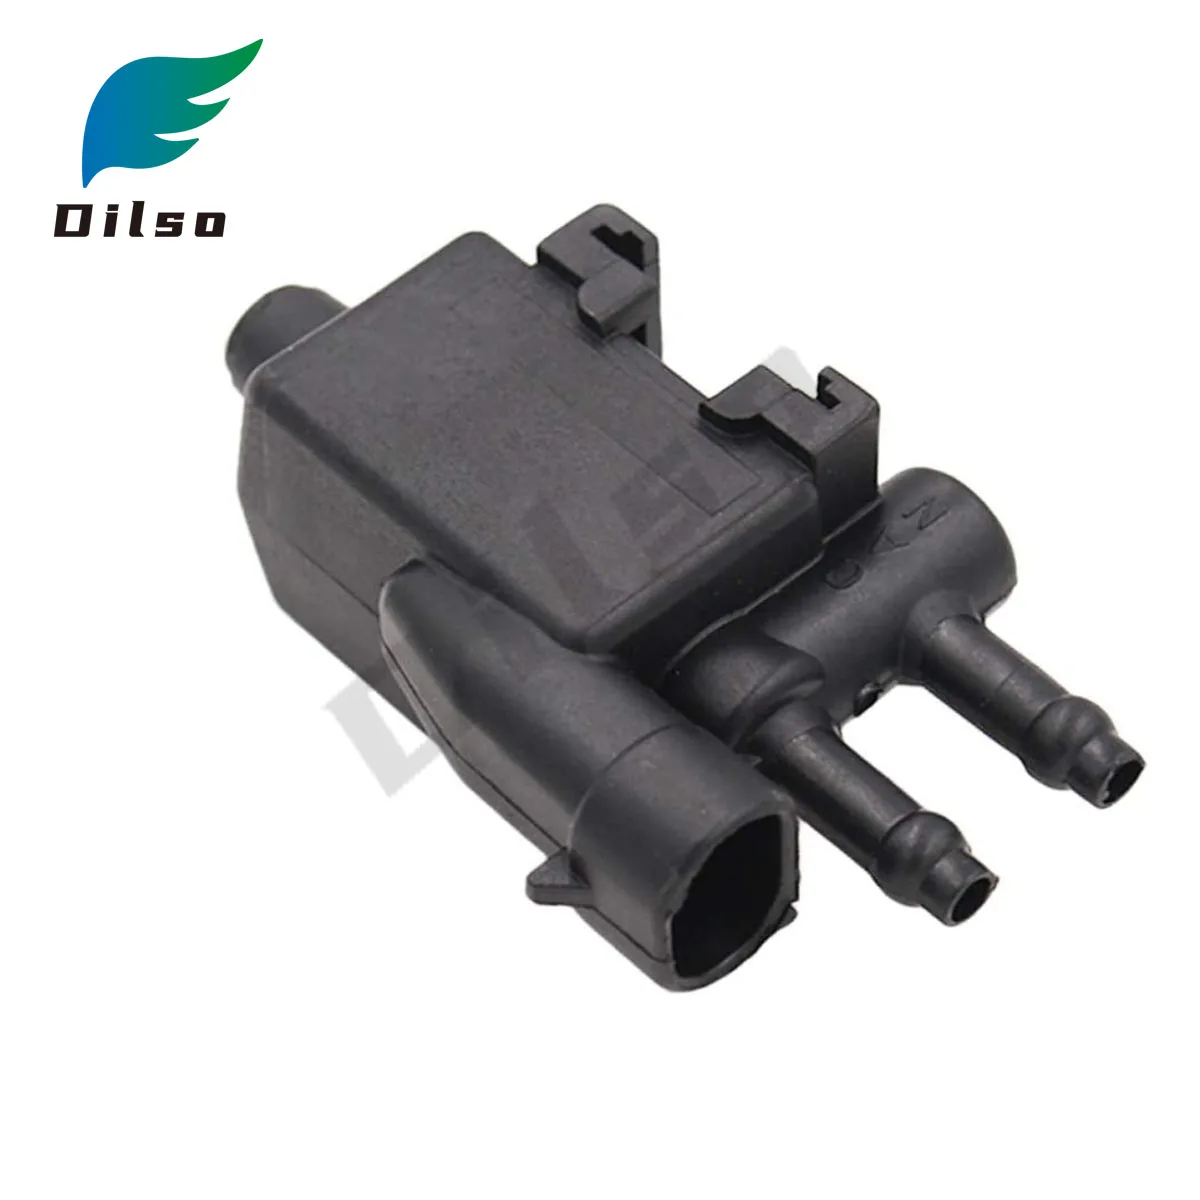 

Emission Canister Purge Solenoid Valve 96334843 For Buick Excelle Chevrolet Aveo Daewoo Kalos Carbon Canister Control Valve